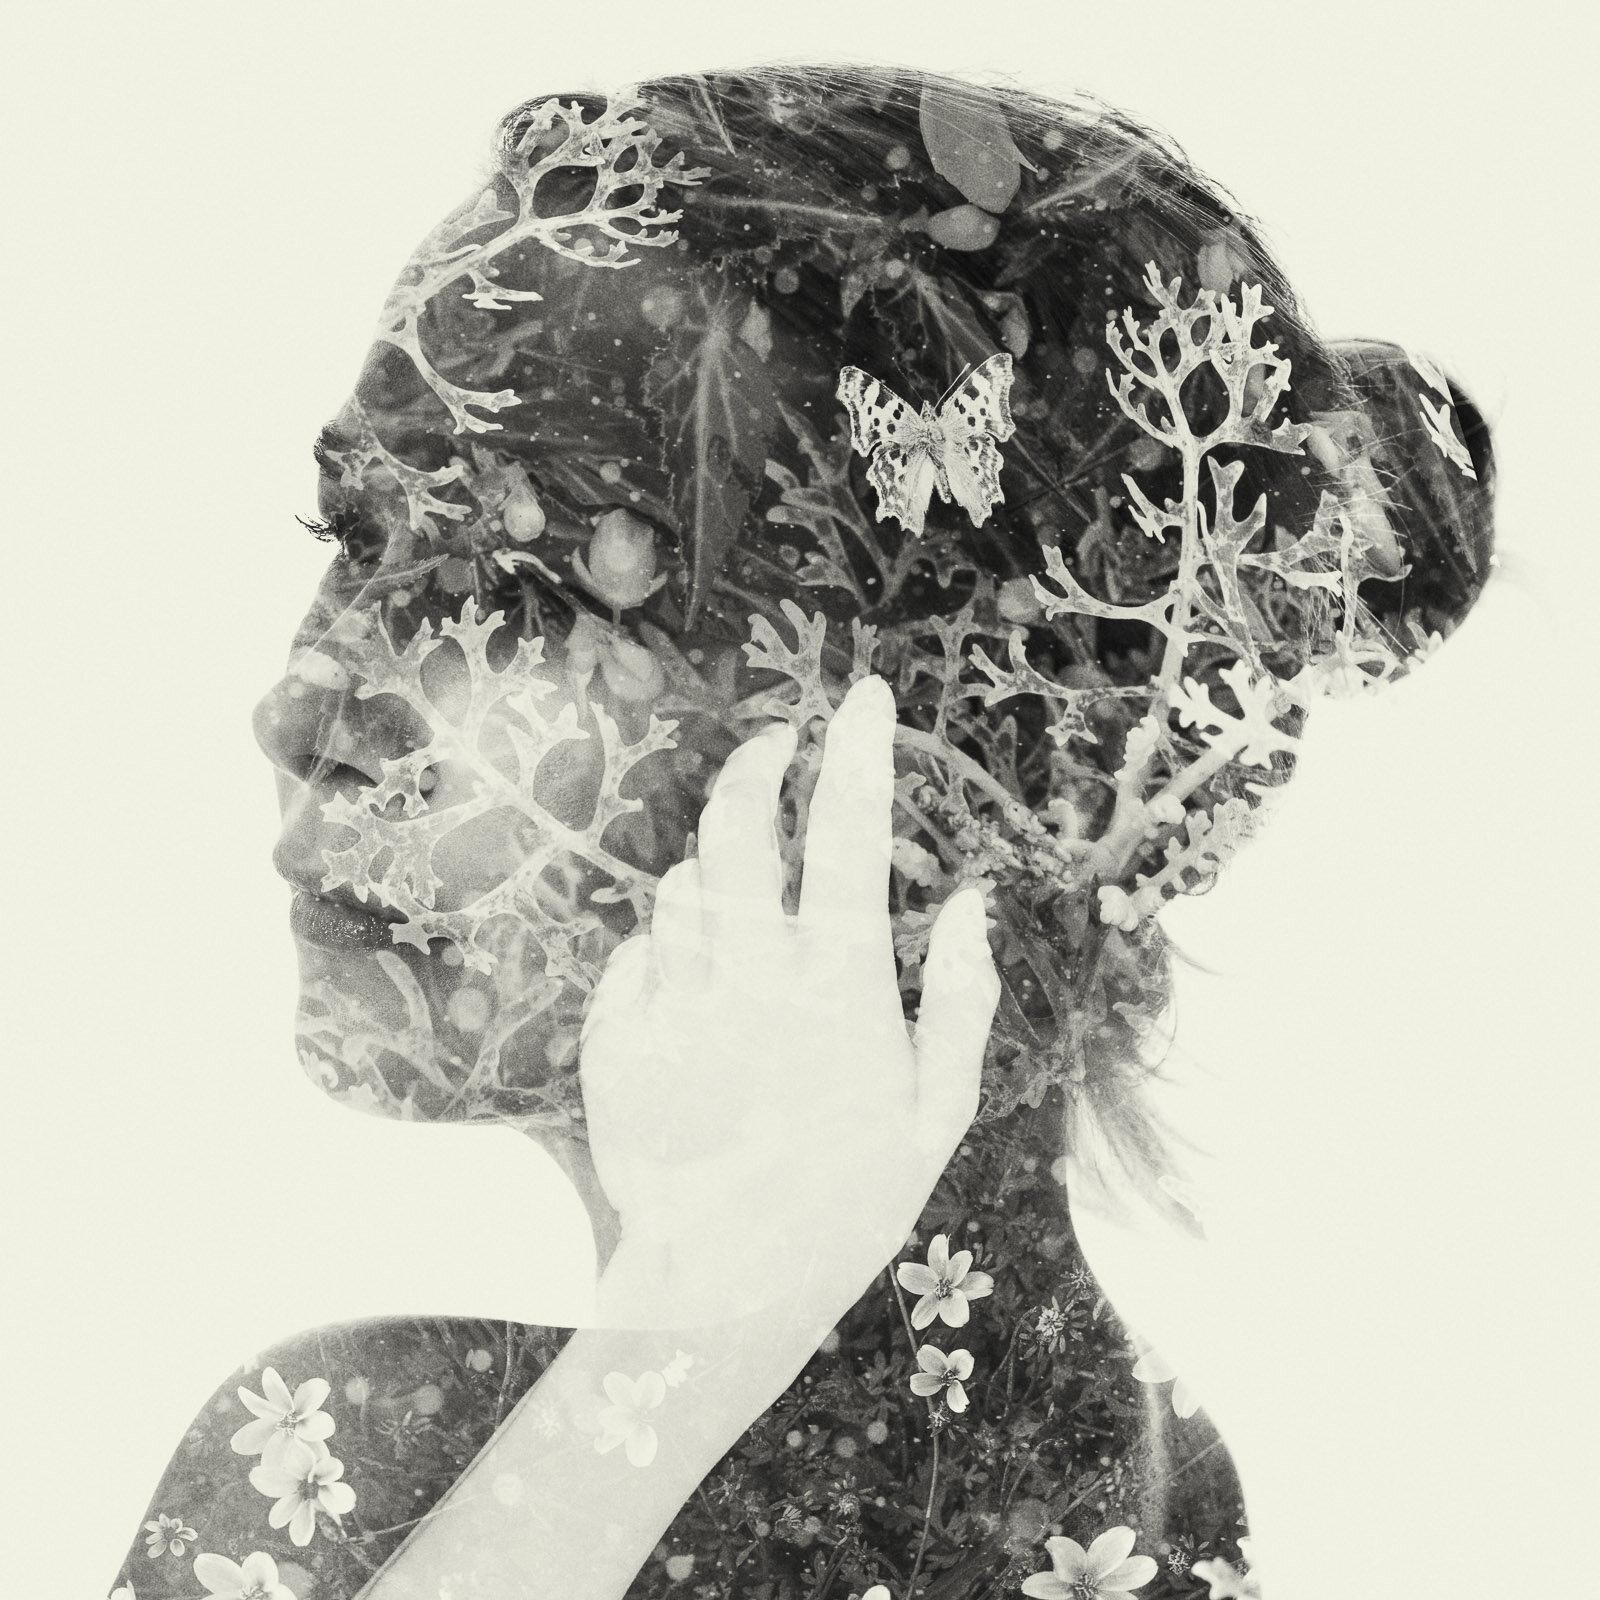 Christoffer Relander Black and White Photograph - Collector - black and white portrait and nature multi exposure photograph